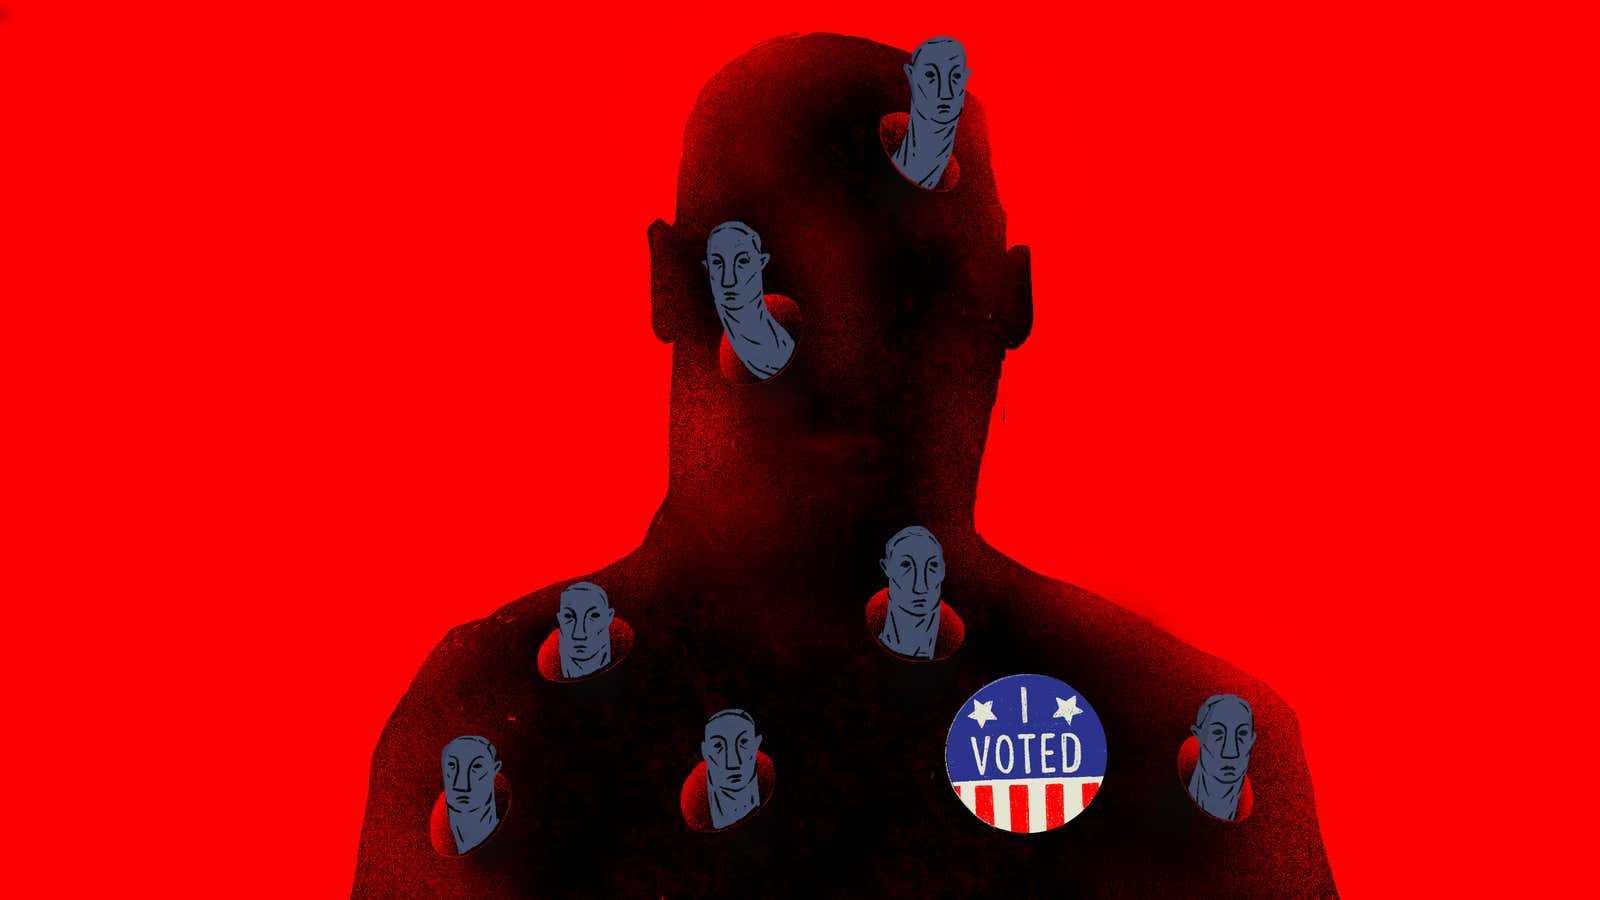 What the U.S. Should Have Learned From the 2016 Election